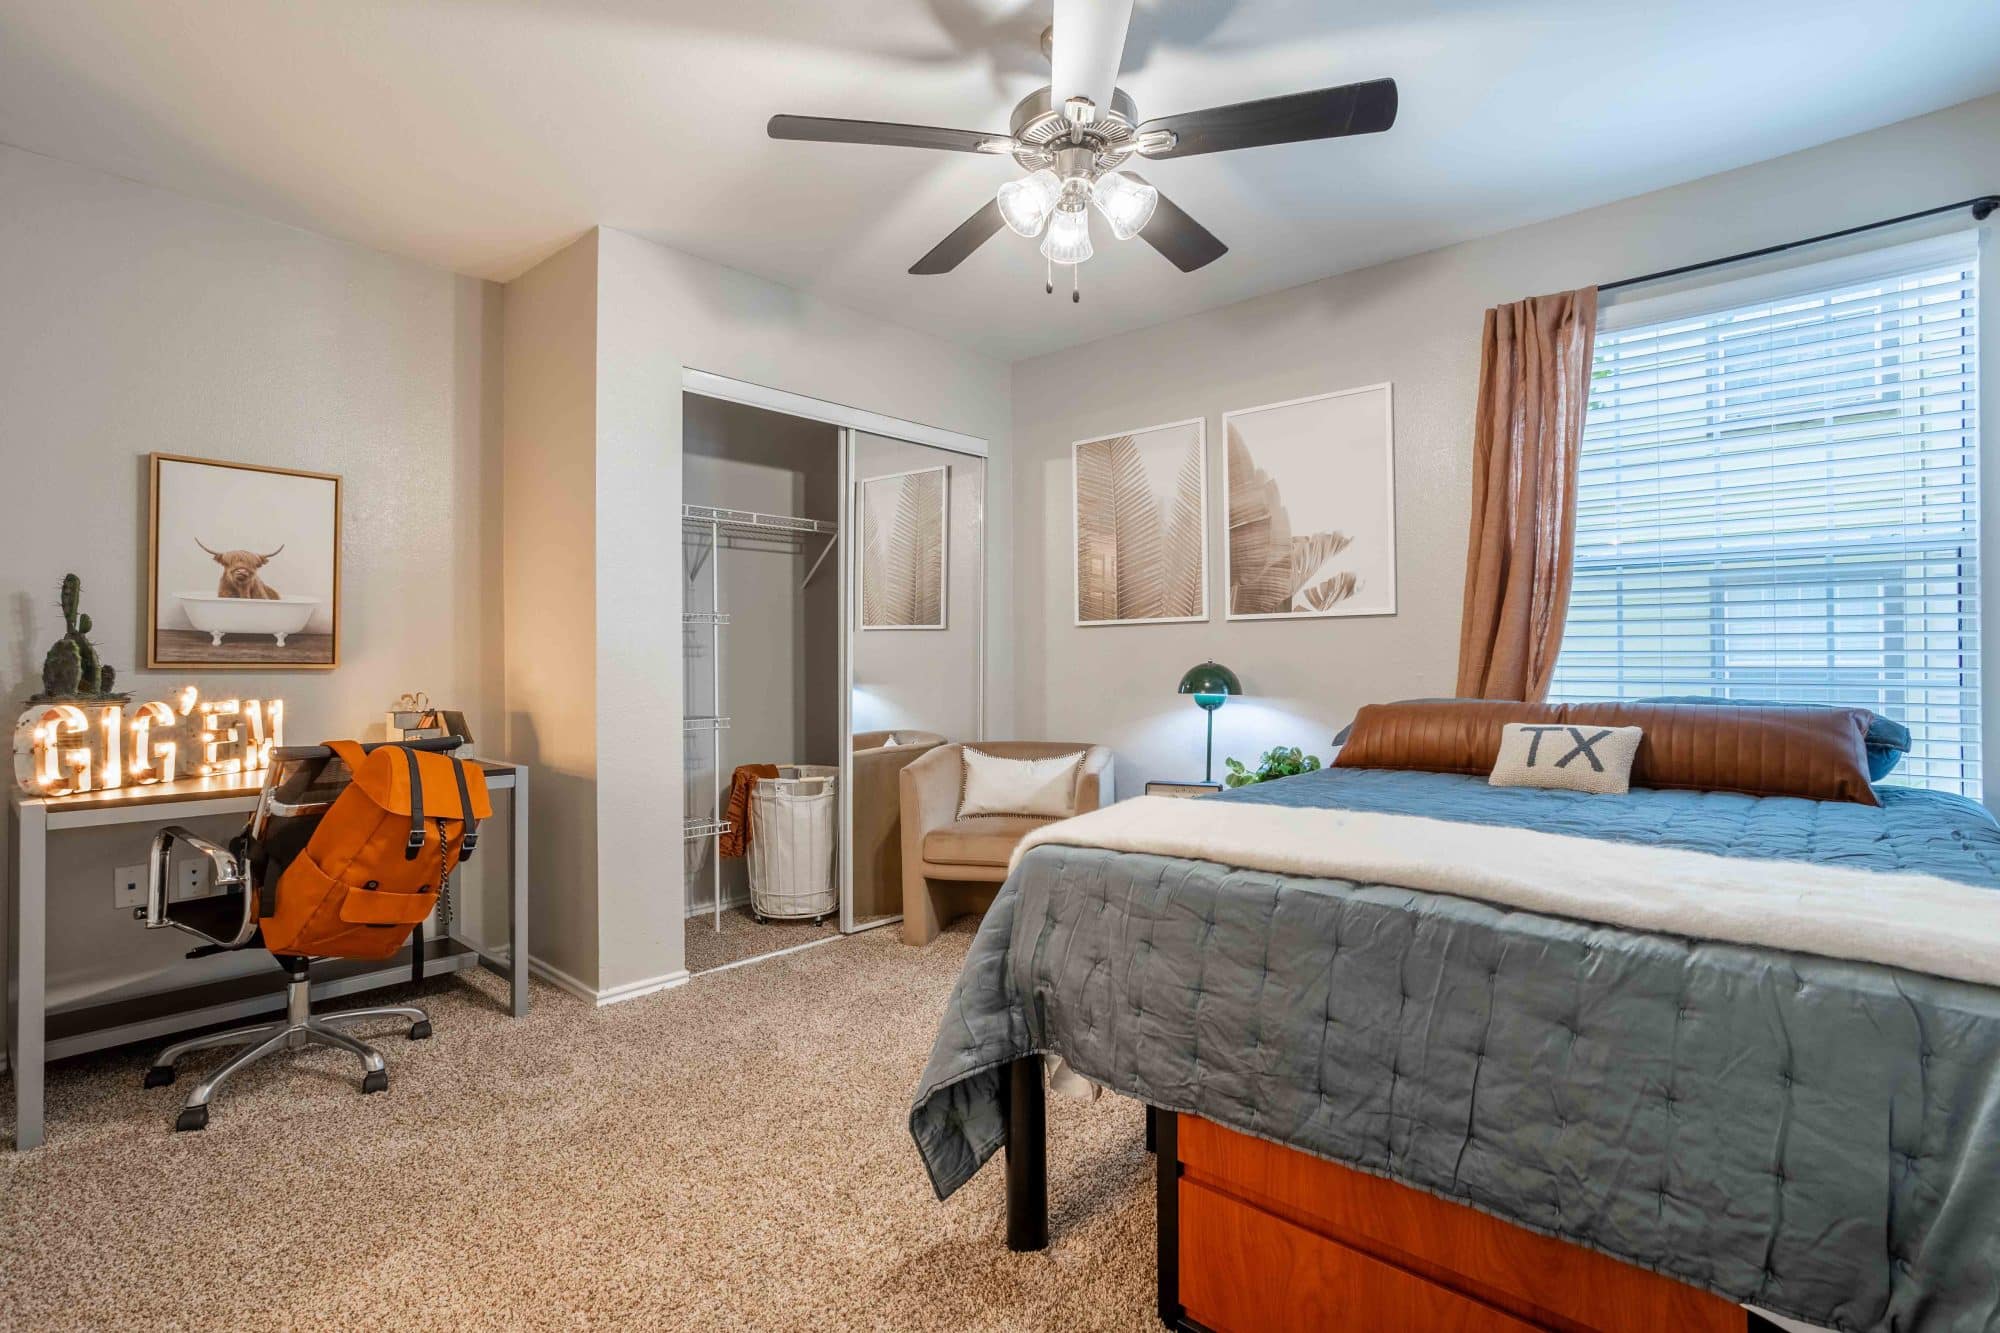 university trails college station off campus apartments near texas a m fully furnished private bedrooms